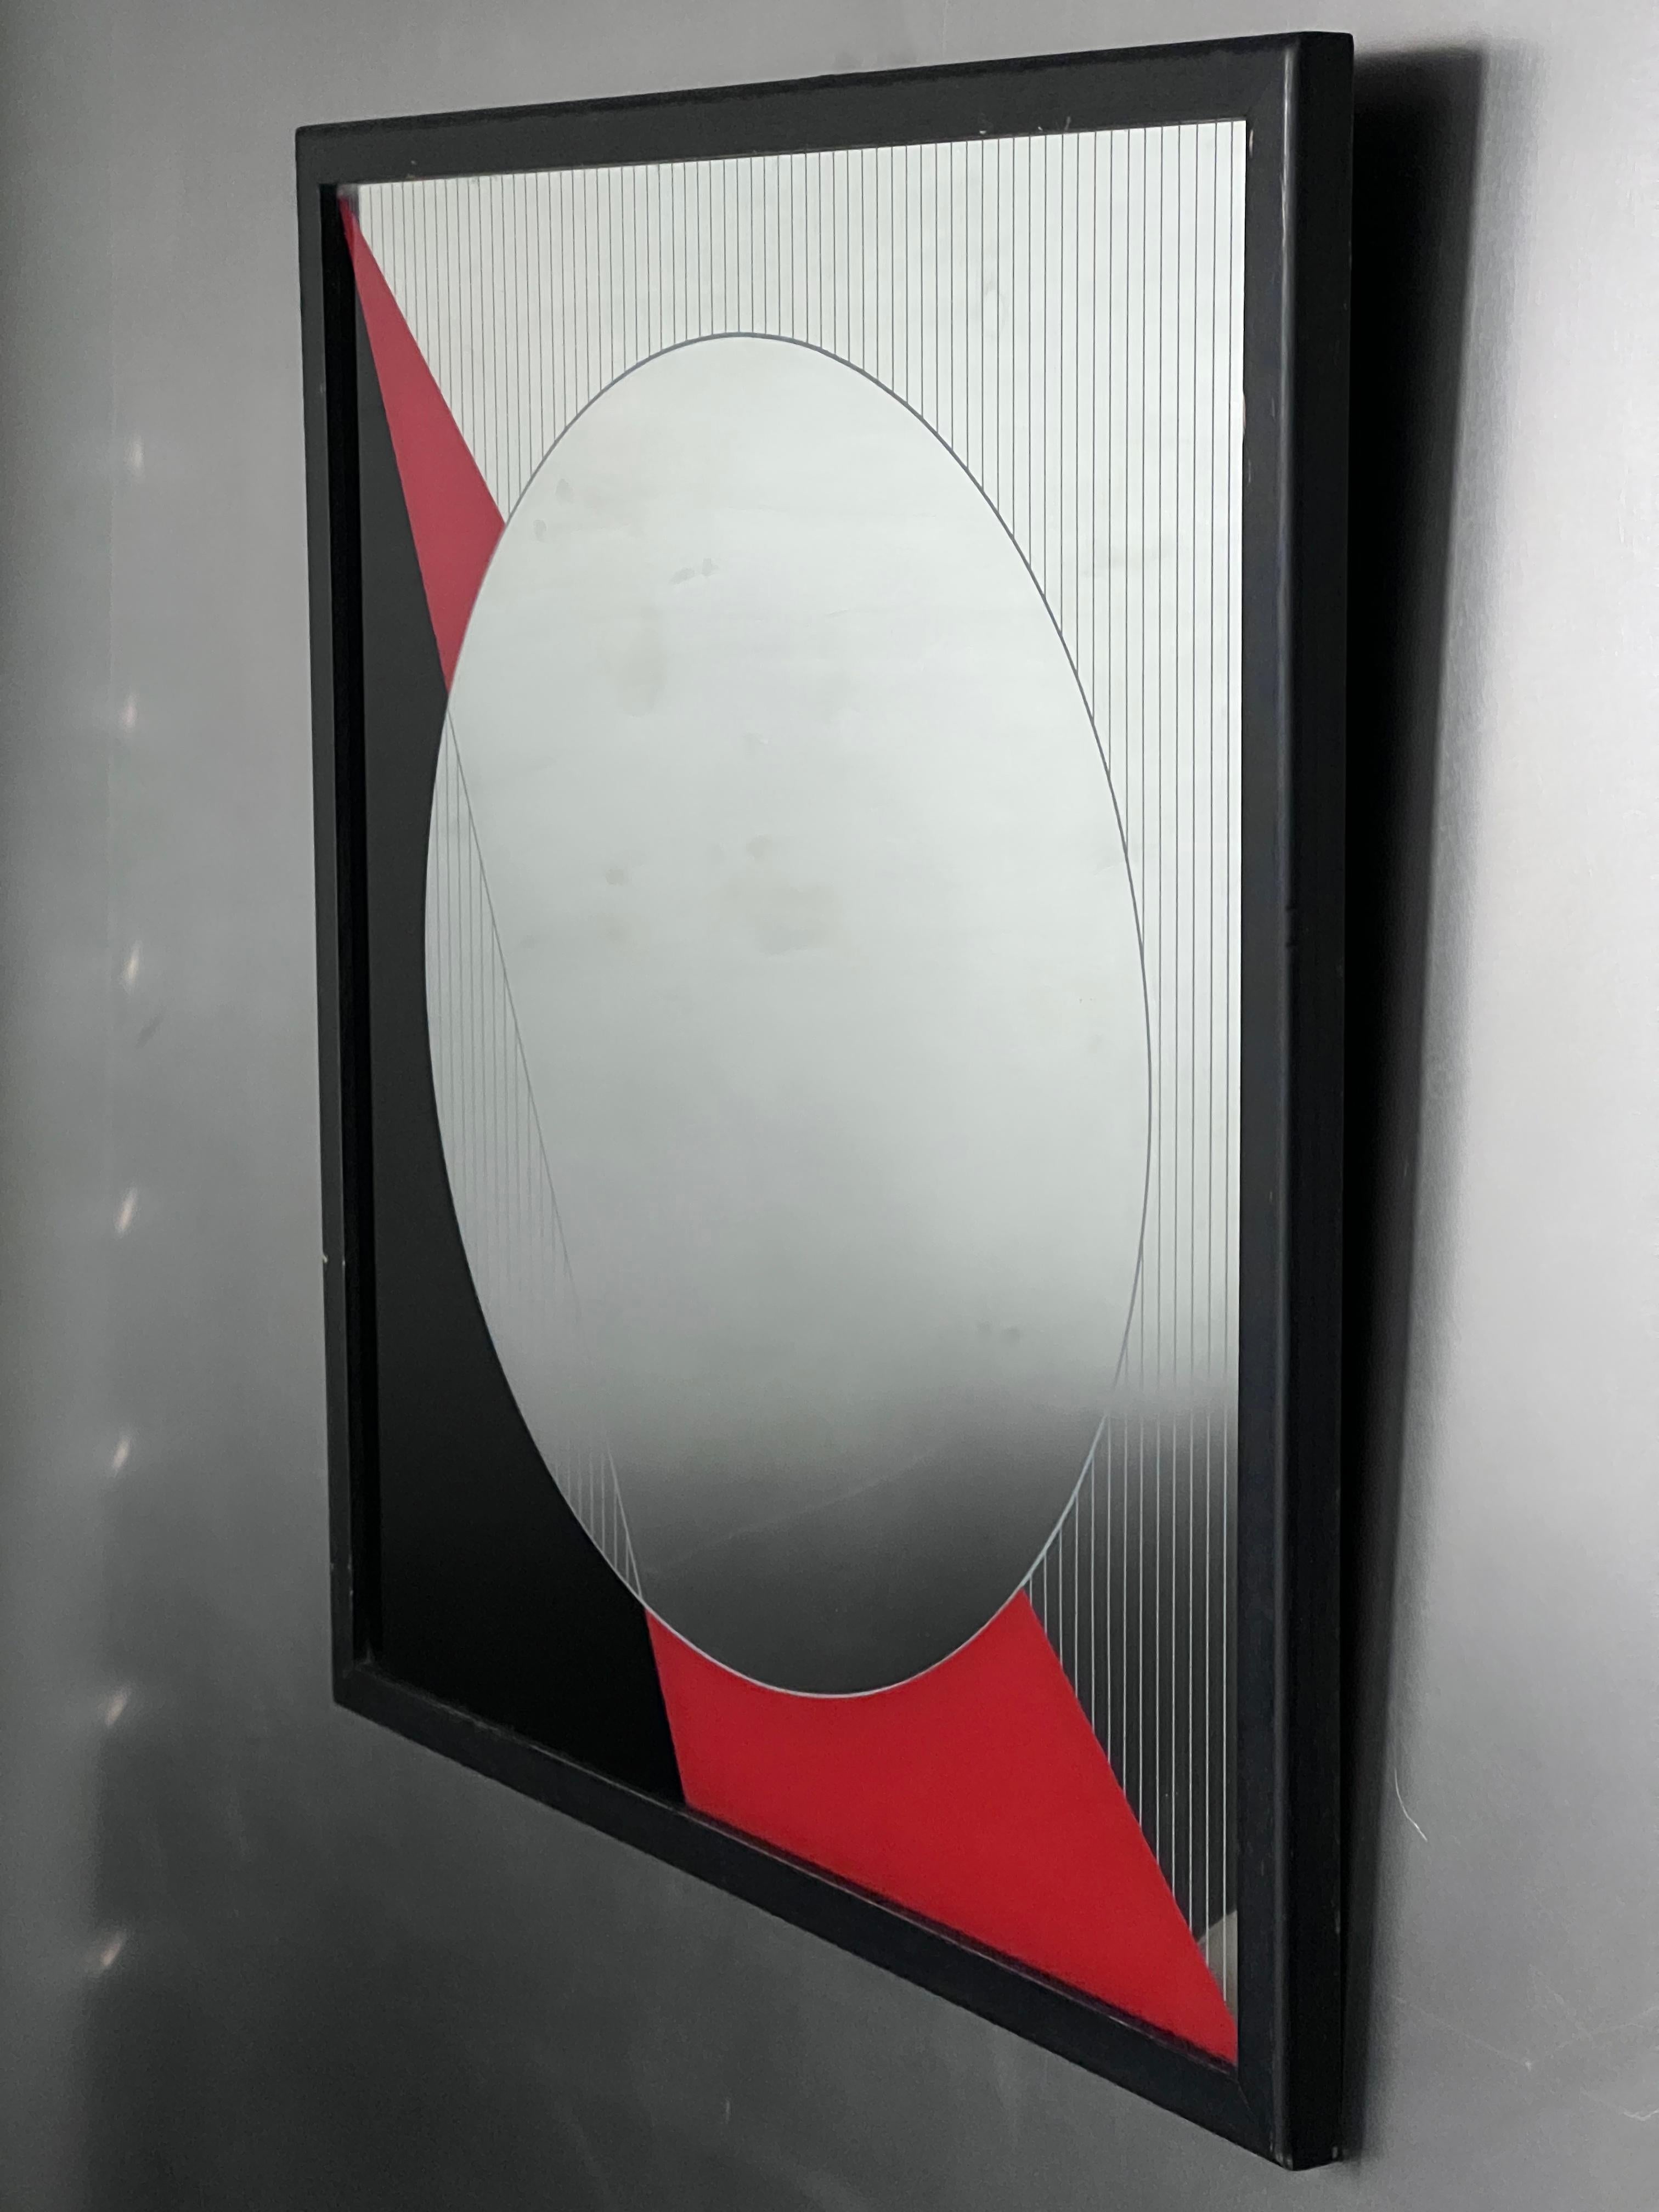 Decorative geometric wall mirror by Italian artist Eugenio Carmi for furniture brand Acerbis. Designed in the 1980s and named 